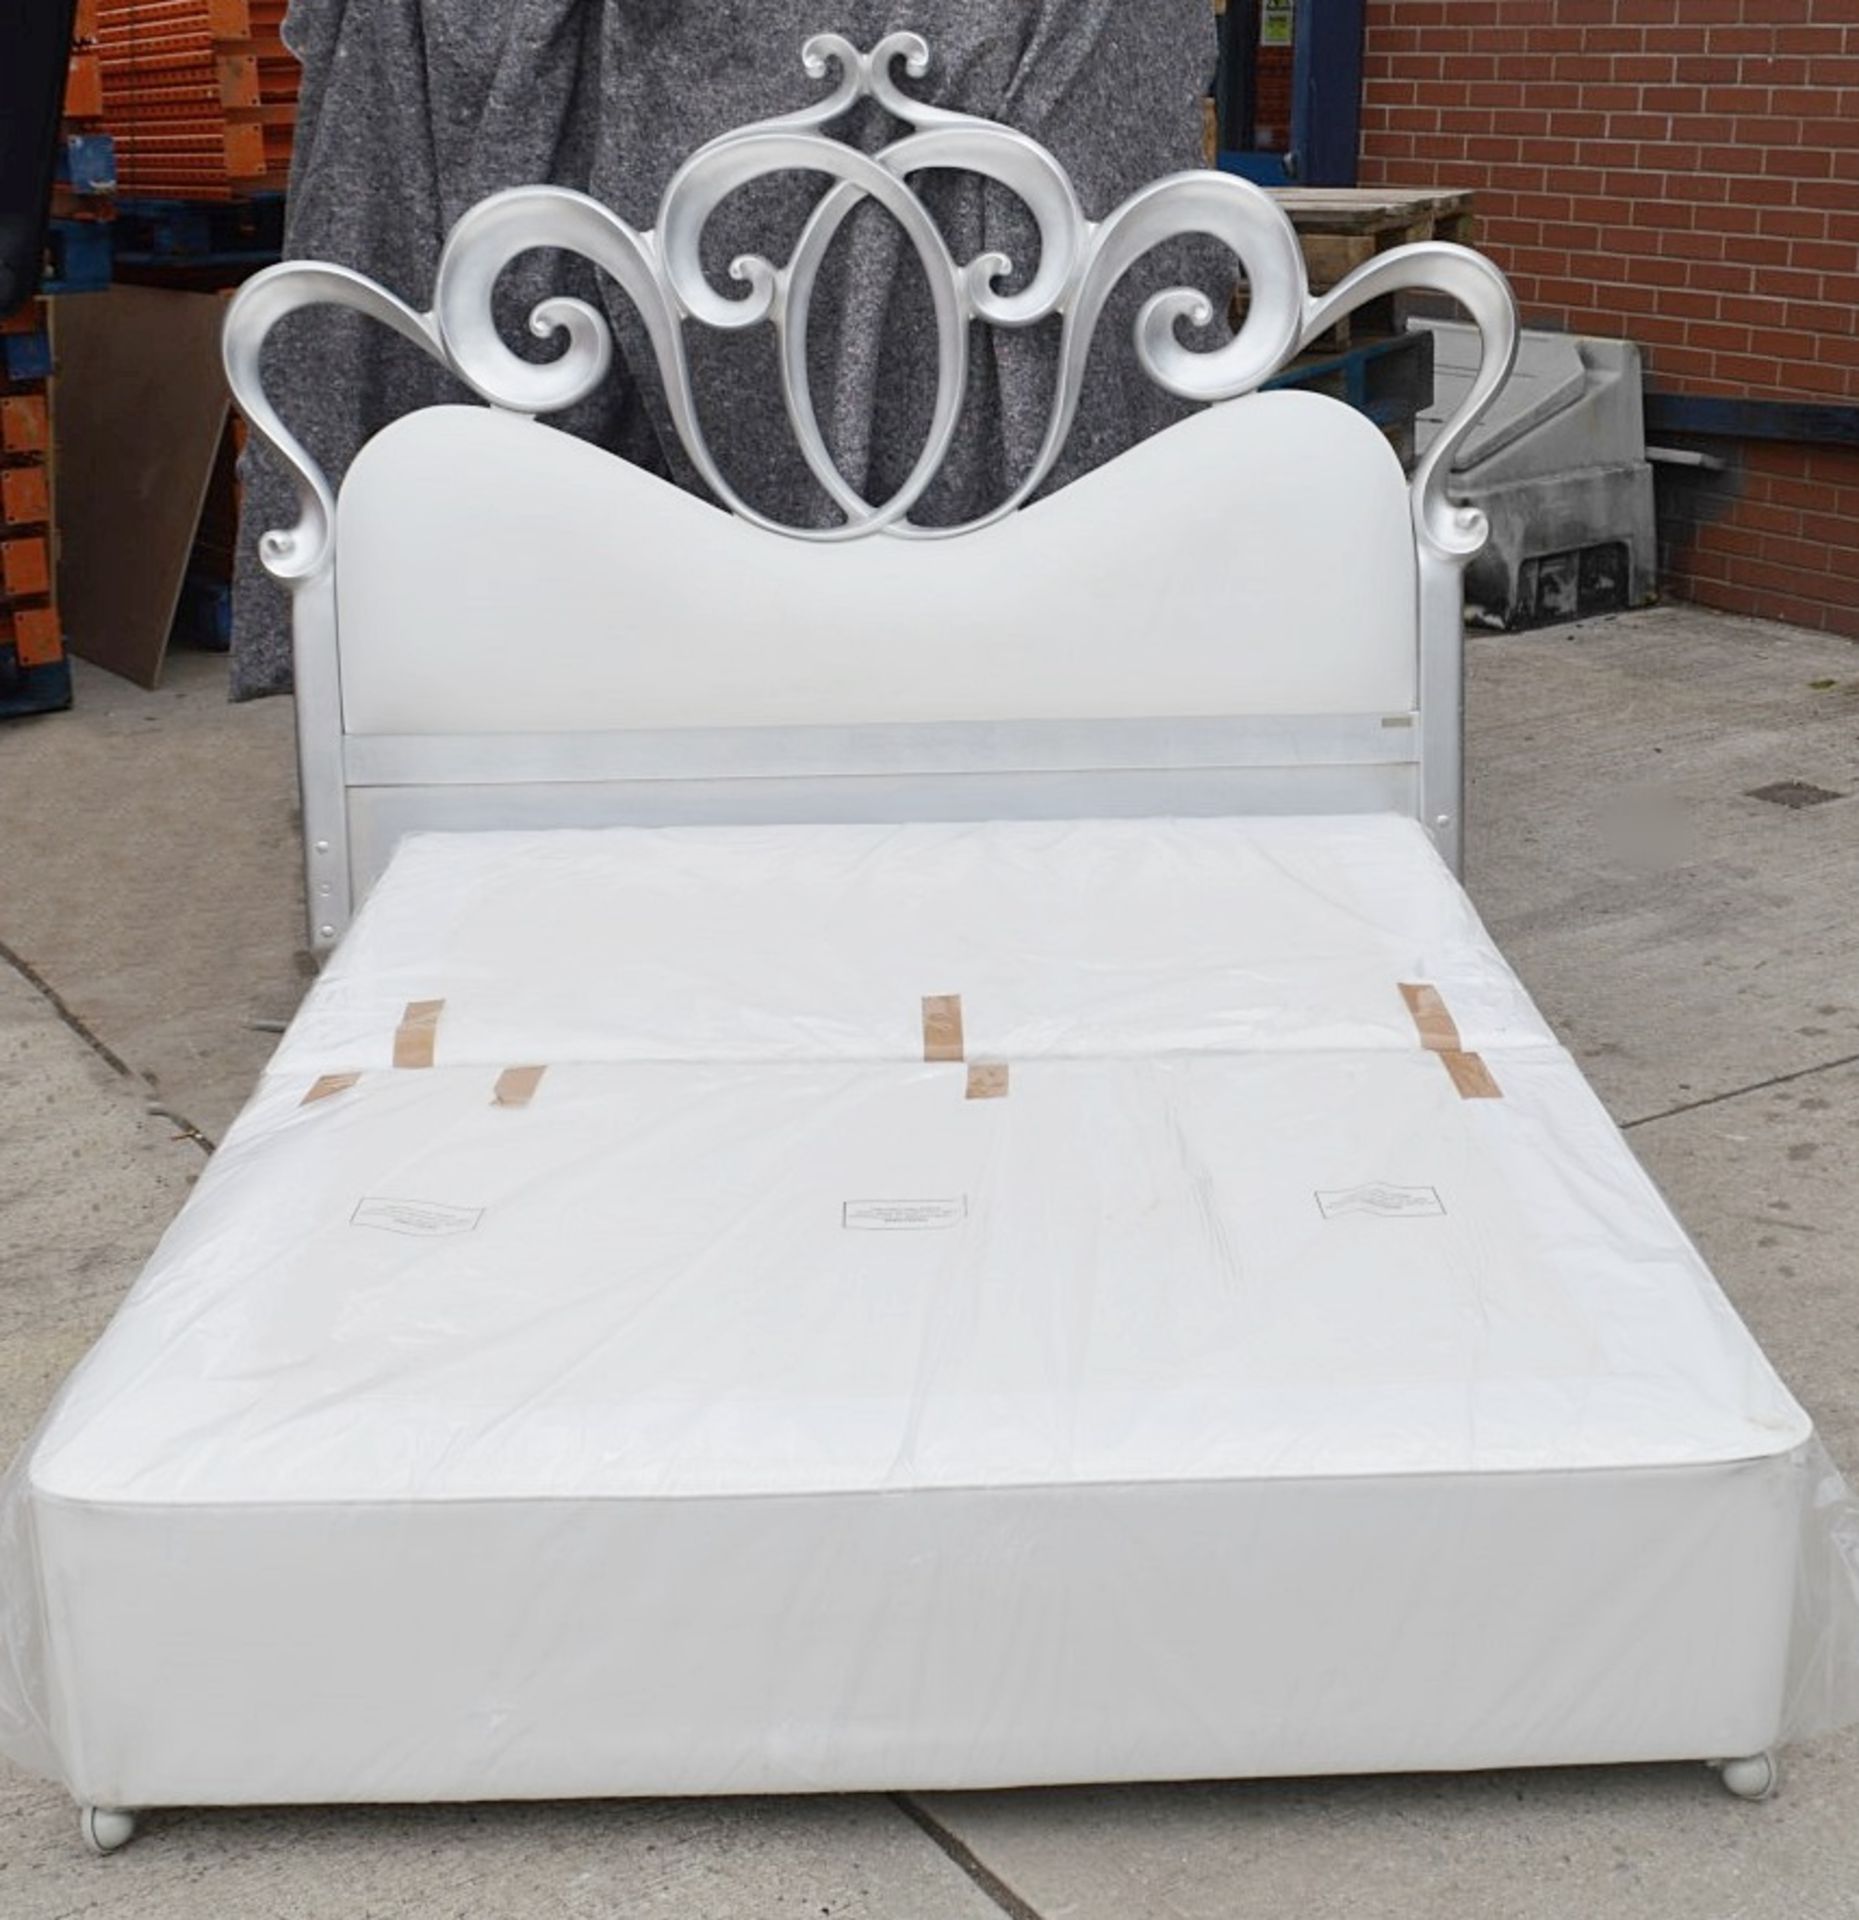 1 x Kingsize Divan Bed With An Ornate CorteZari Italian Headboard In Silver Upholstered In White - Image 2 of 4